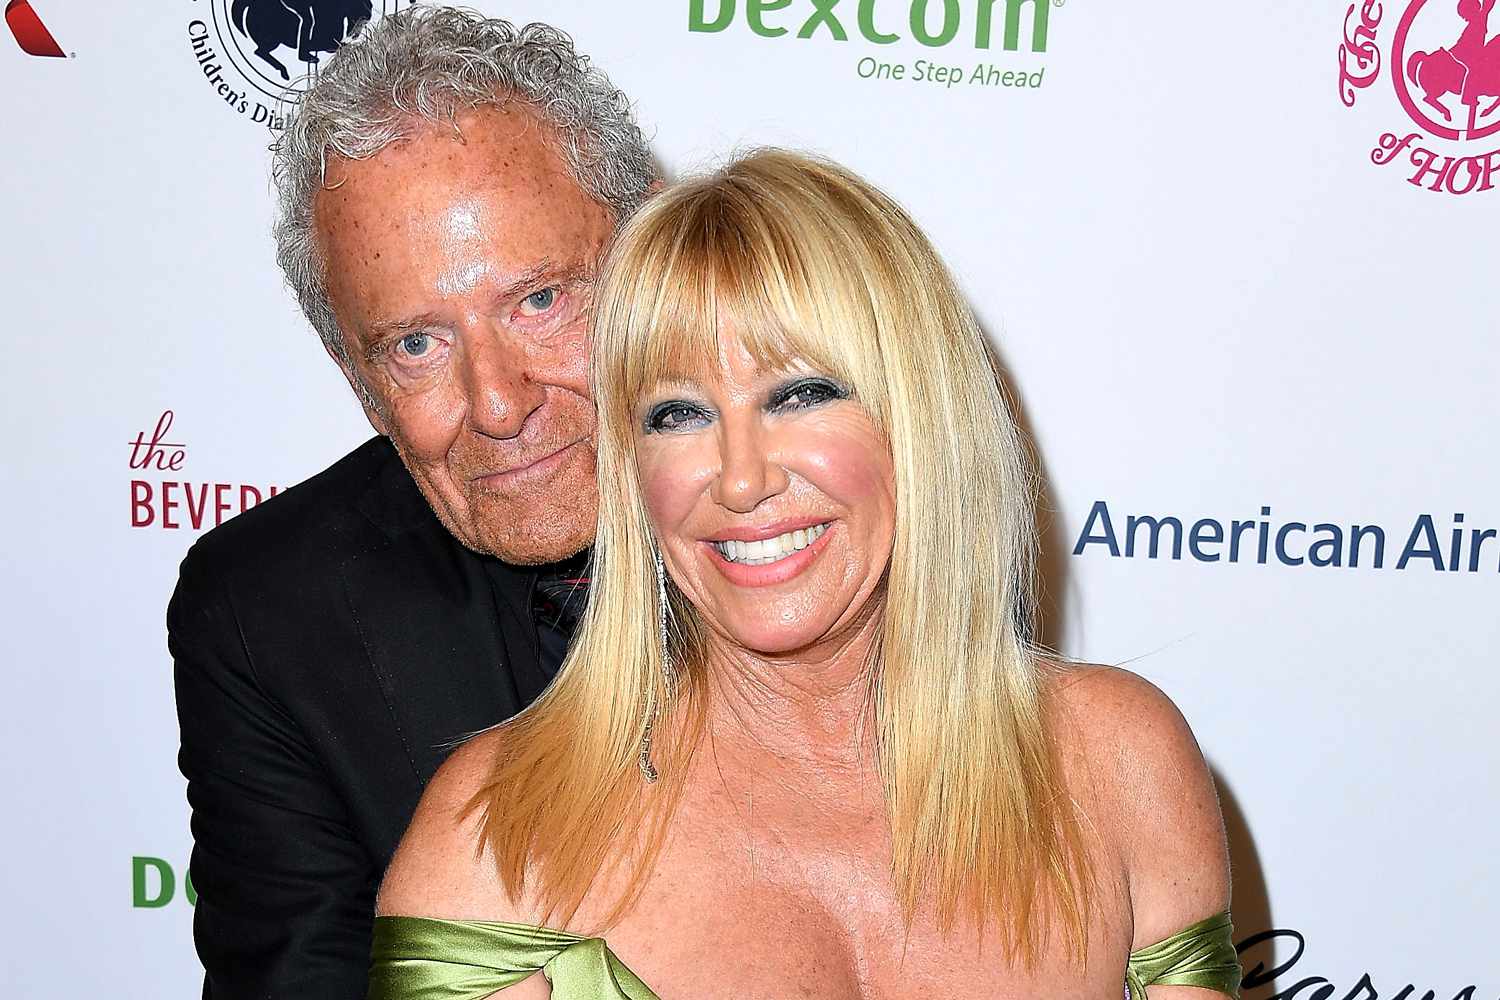 Suzanne Somers’ Late Husband Alan Hamel Writes Heartfelt Love Letter Prior To Her Passing